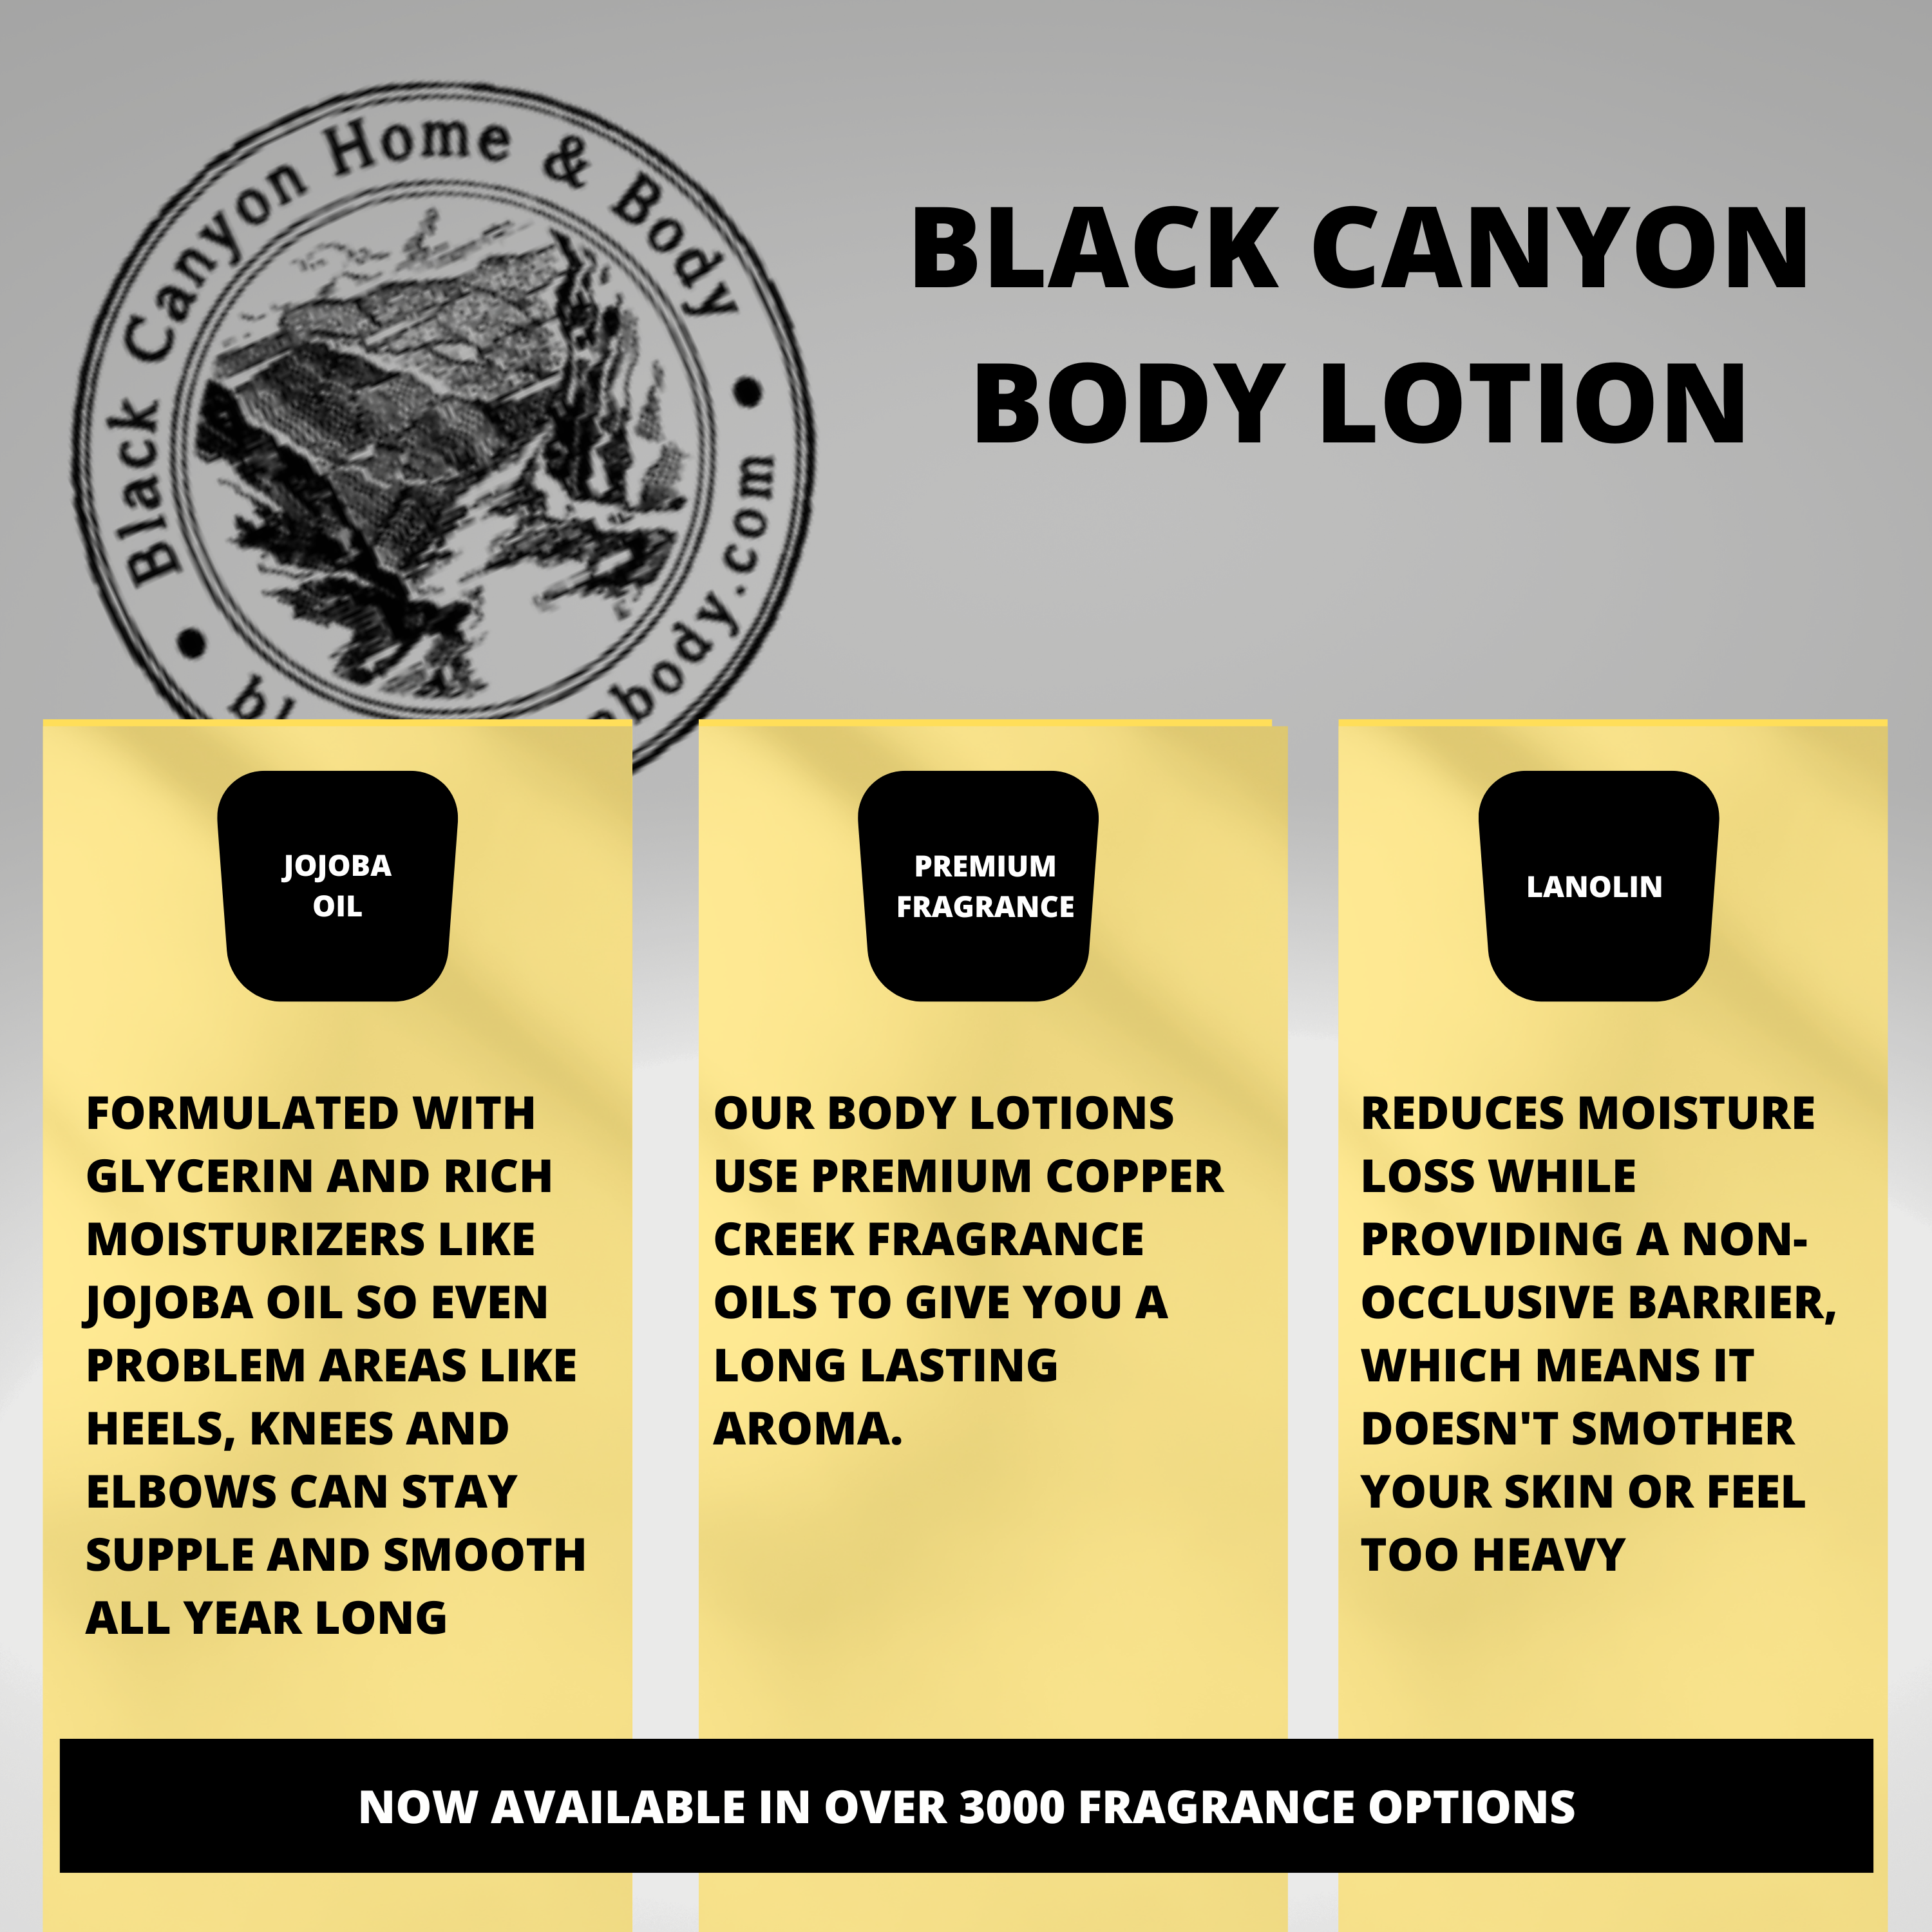 Black Canyon Ginger & Lime Scented Luxury Body Lotion with Lanolin and Jojoba Oil